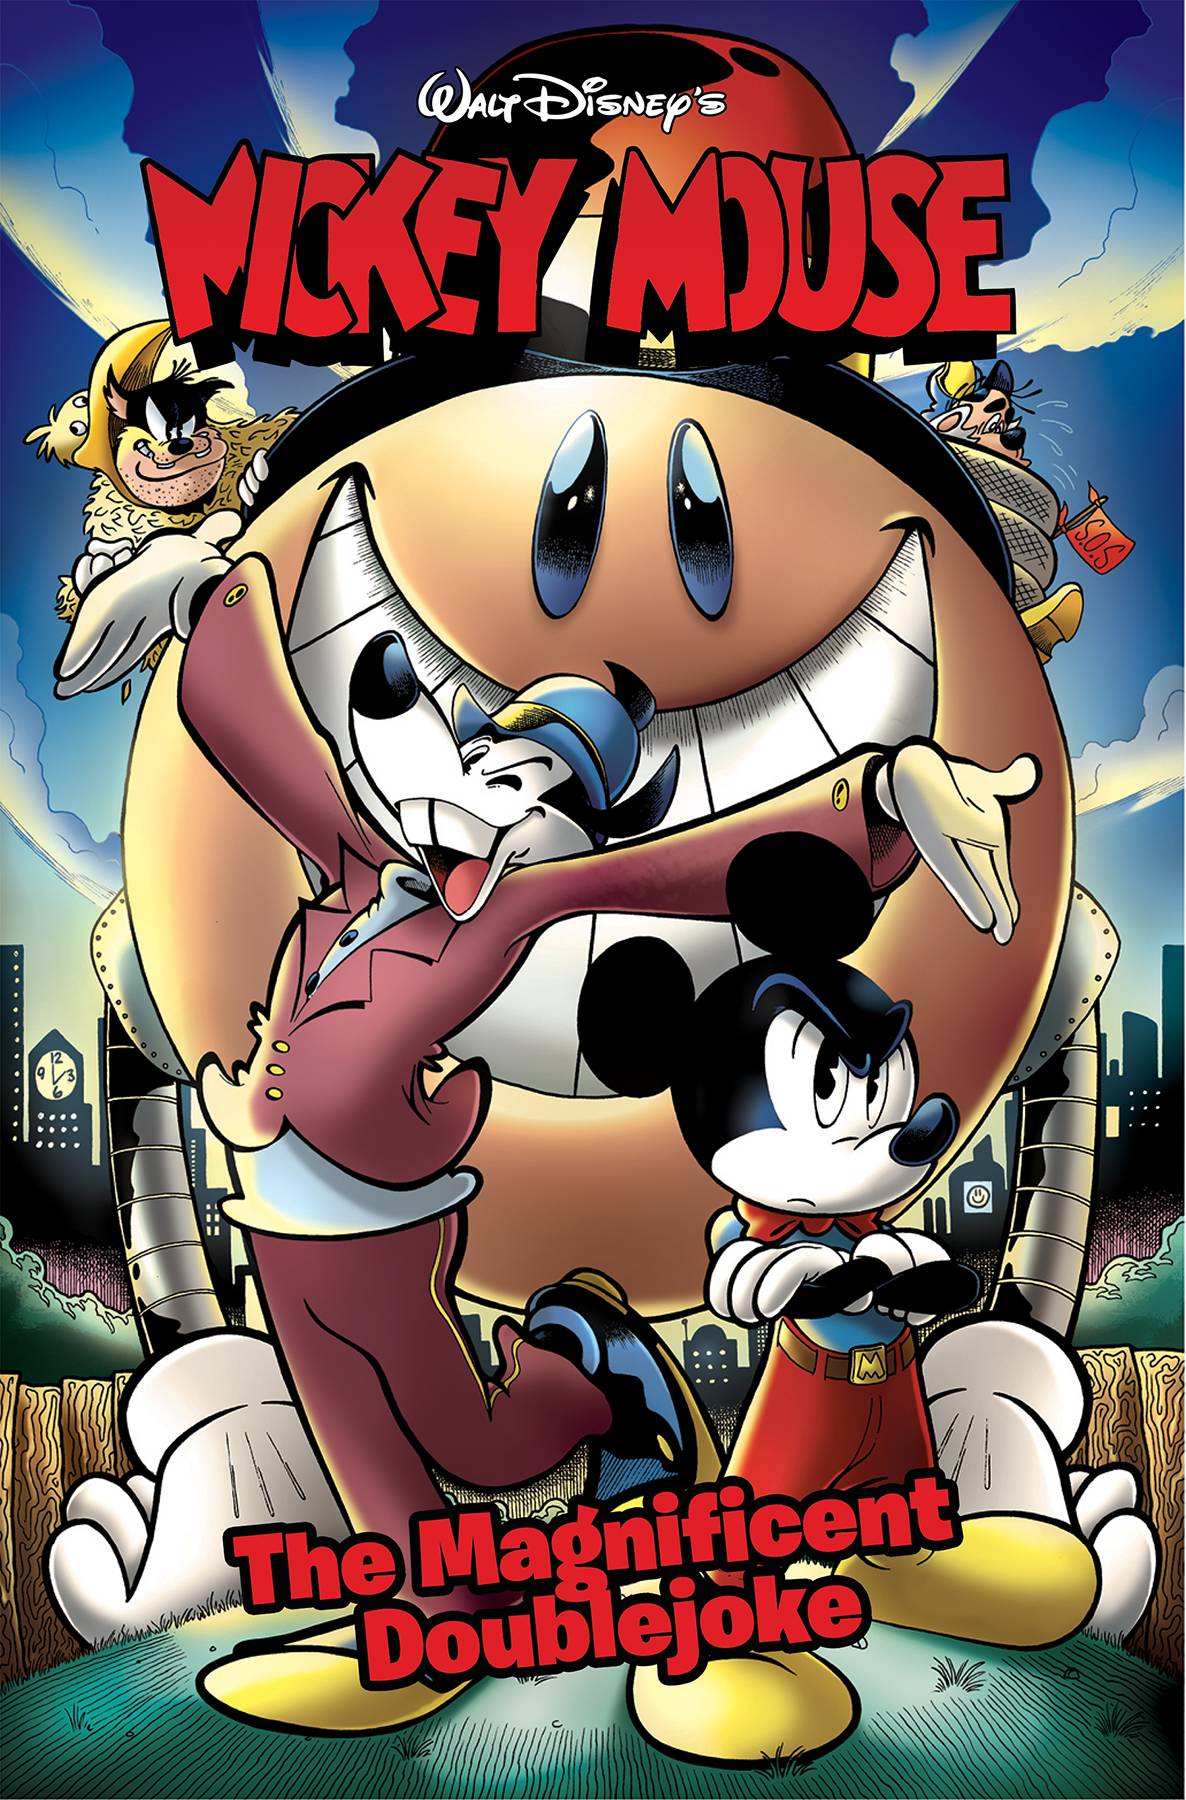 MICKEY MOUSE VOL 07: MAGNIFICENT DOUBLEJOKE